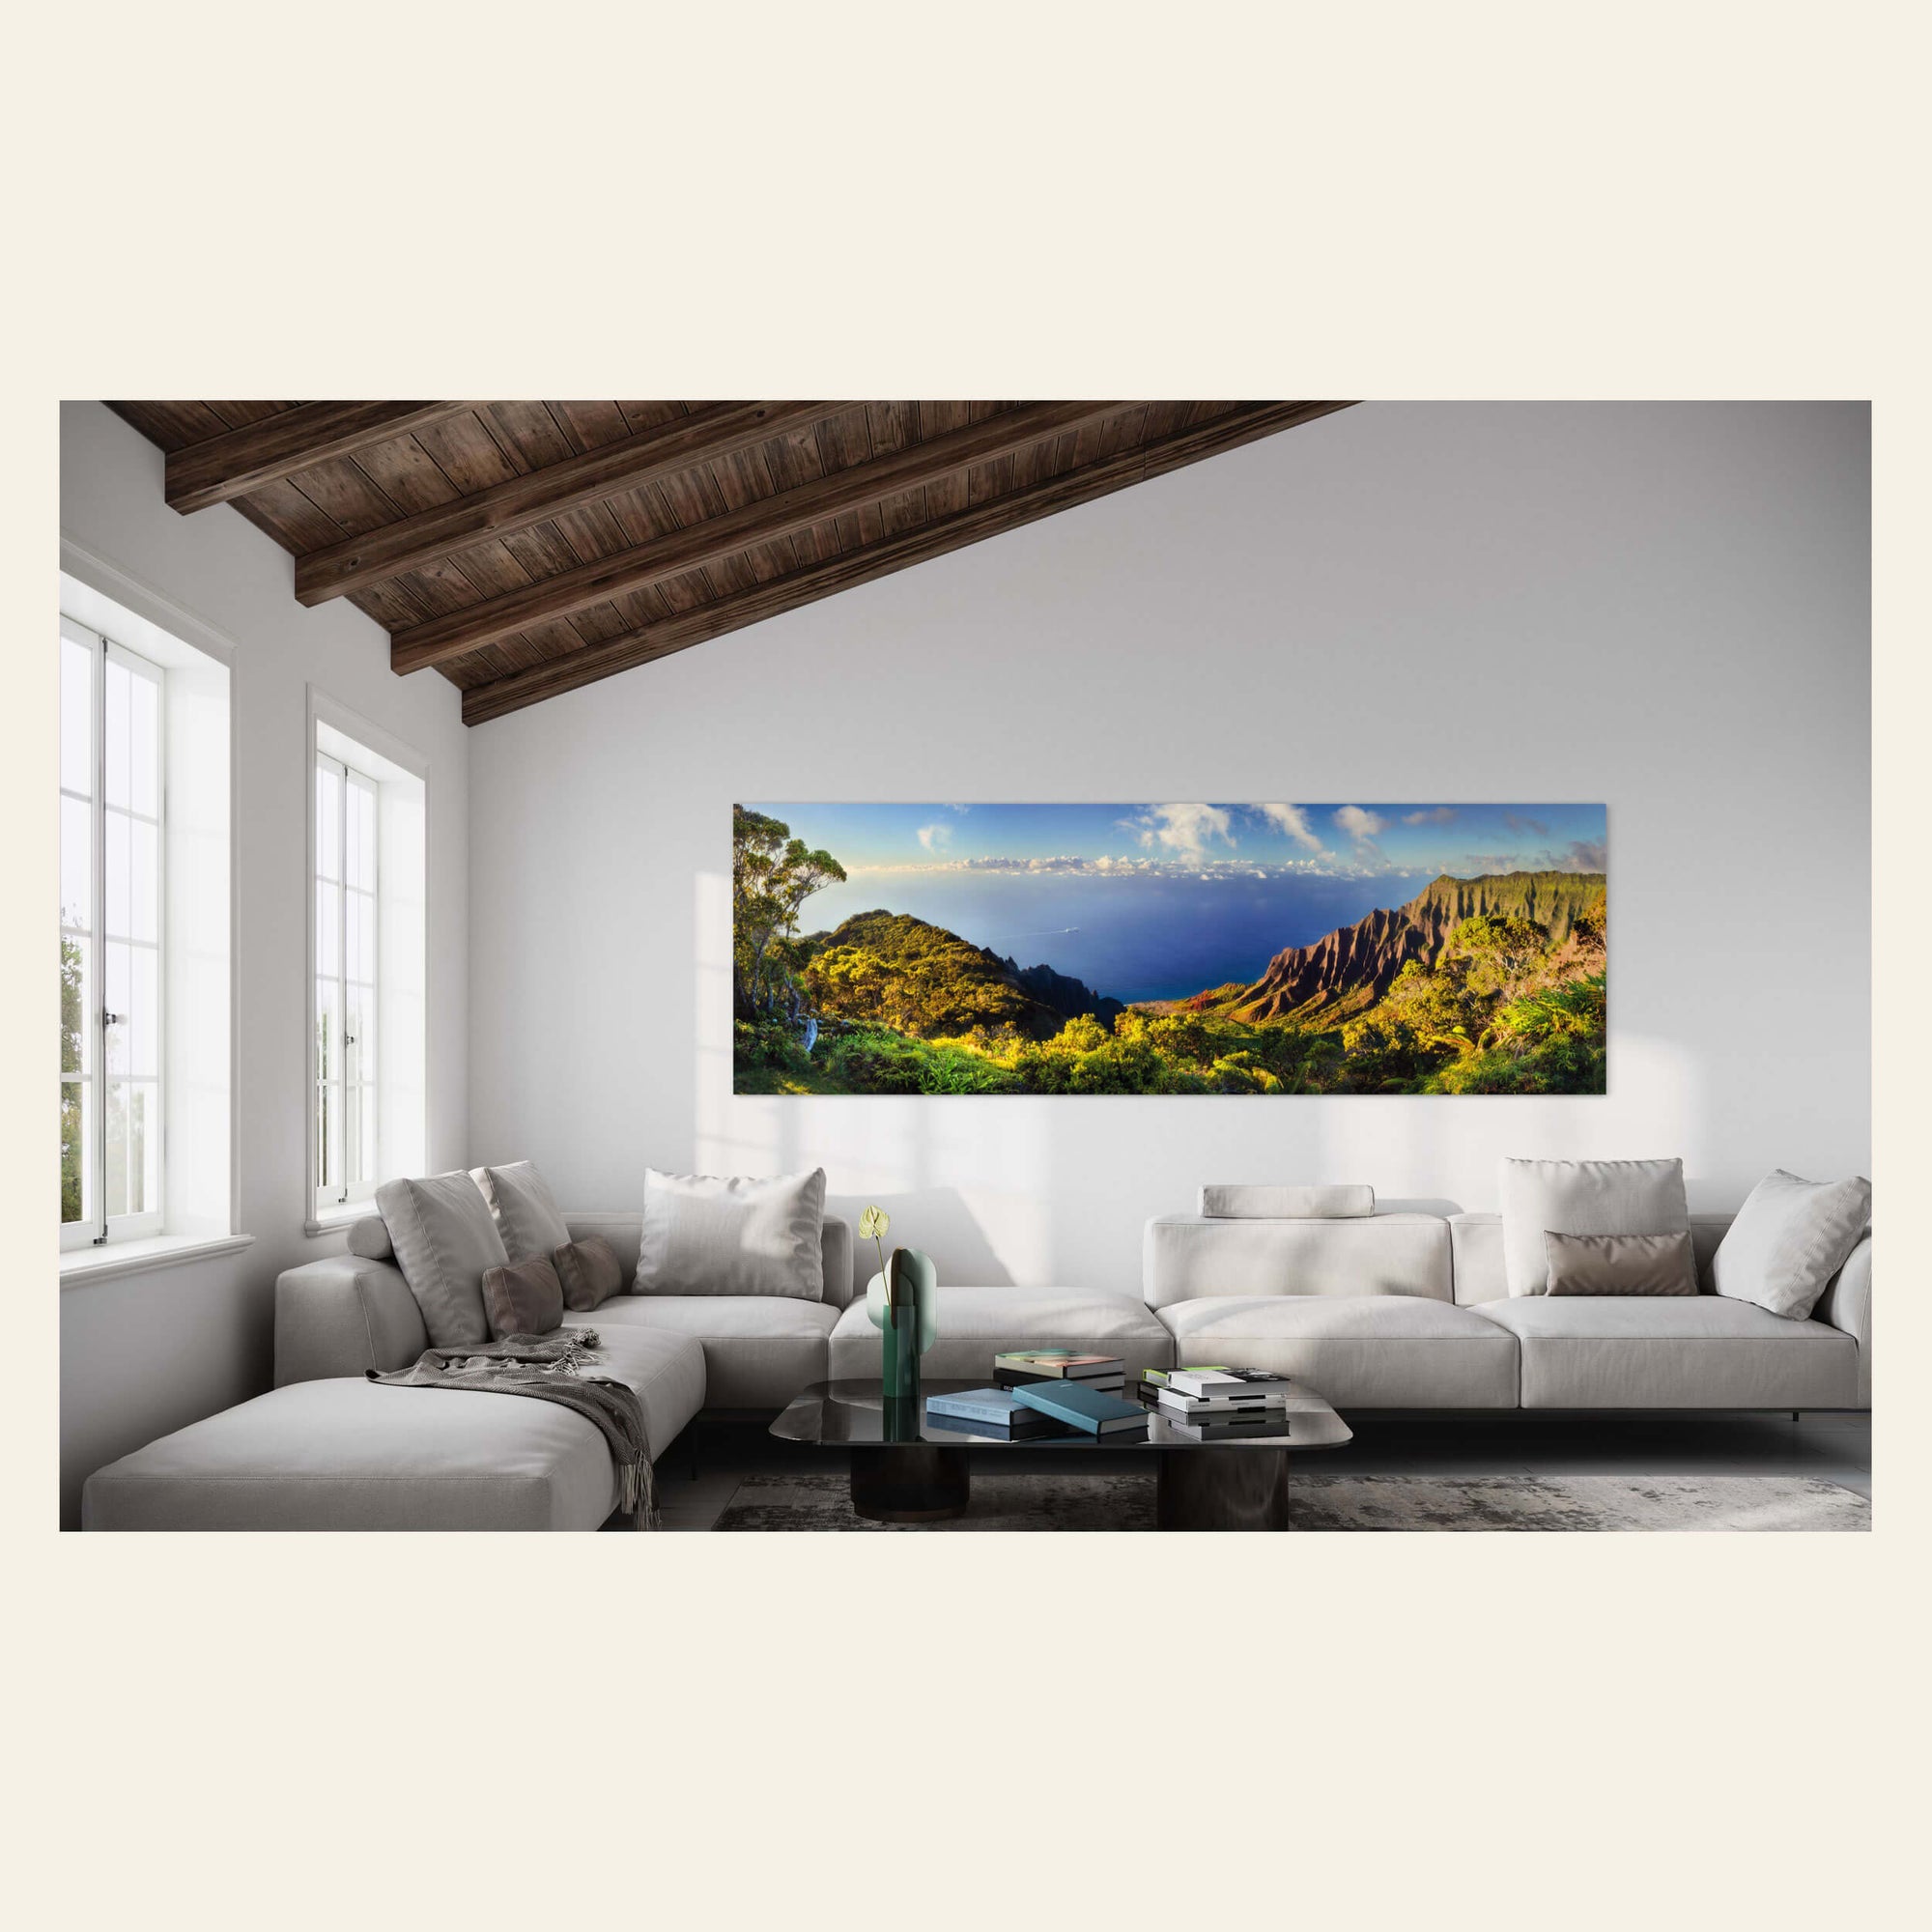 A Napali Coast picture shows the Kalalau Valley on Kauai hangs in a living room.